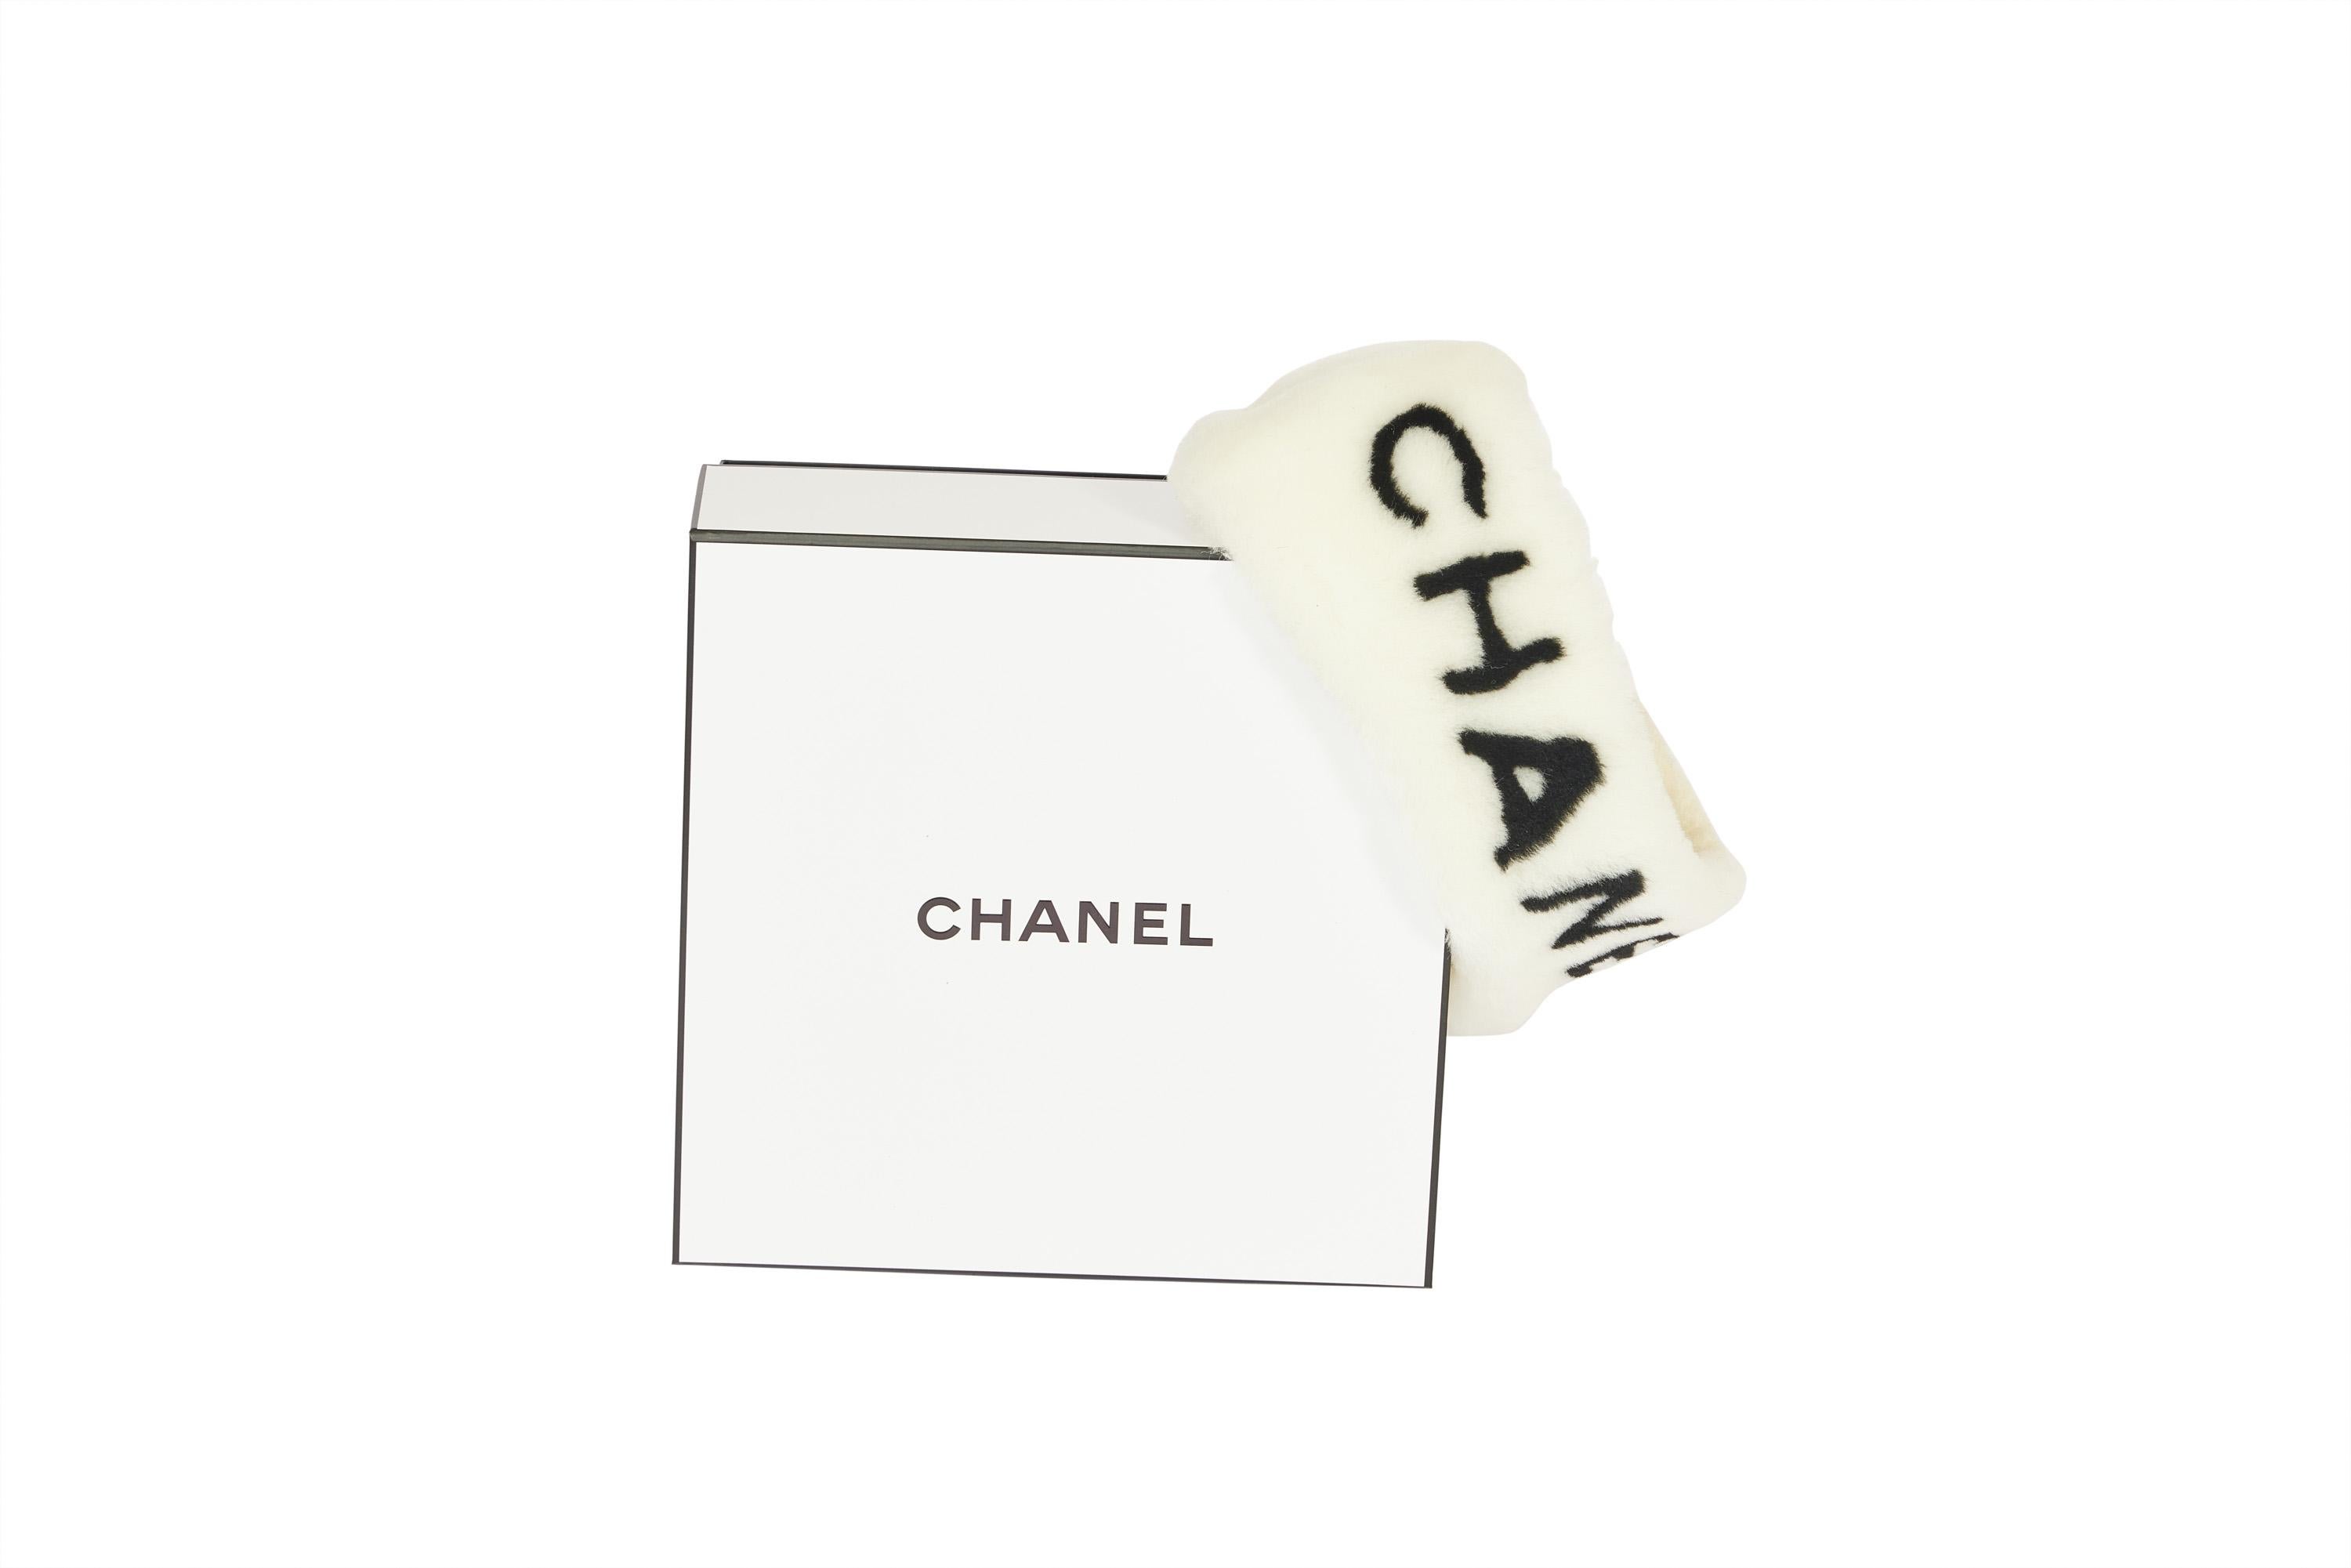 This headband from Chanel is really sought after. It keeps you warm and stays tight on your head Its brand-new and never worn and comes in the original Chanel box. On the front it's written Chanel on it.